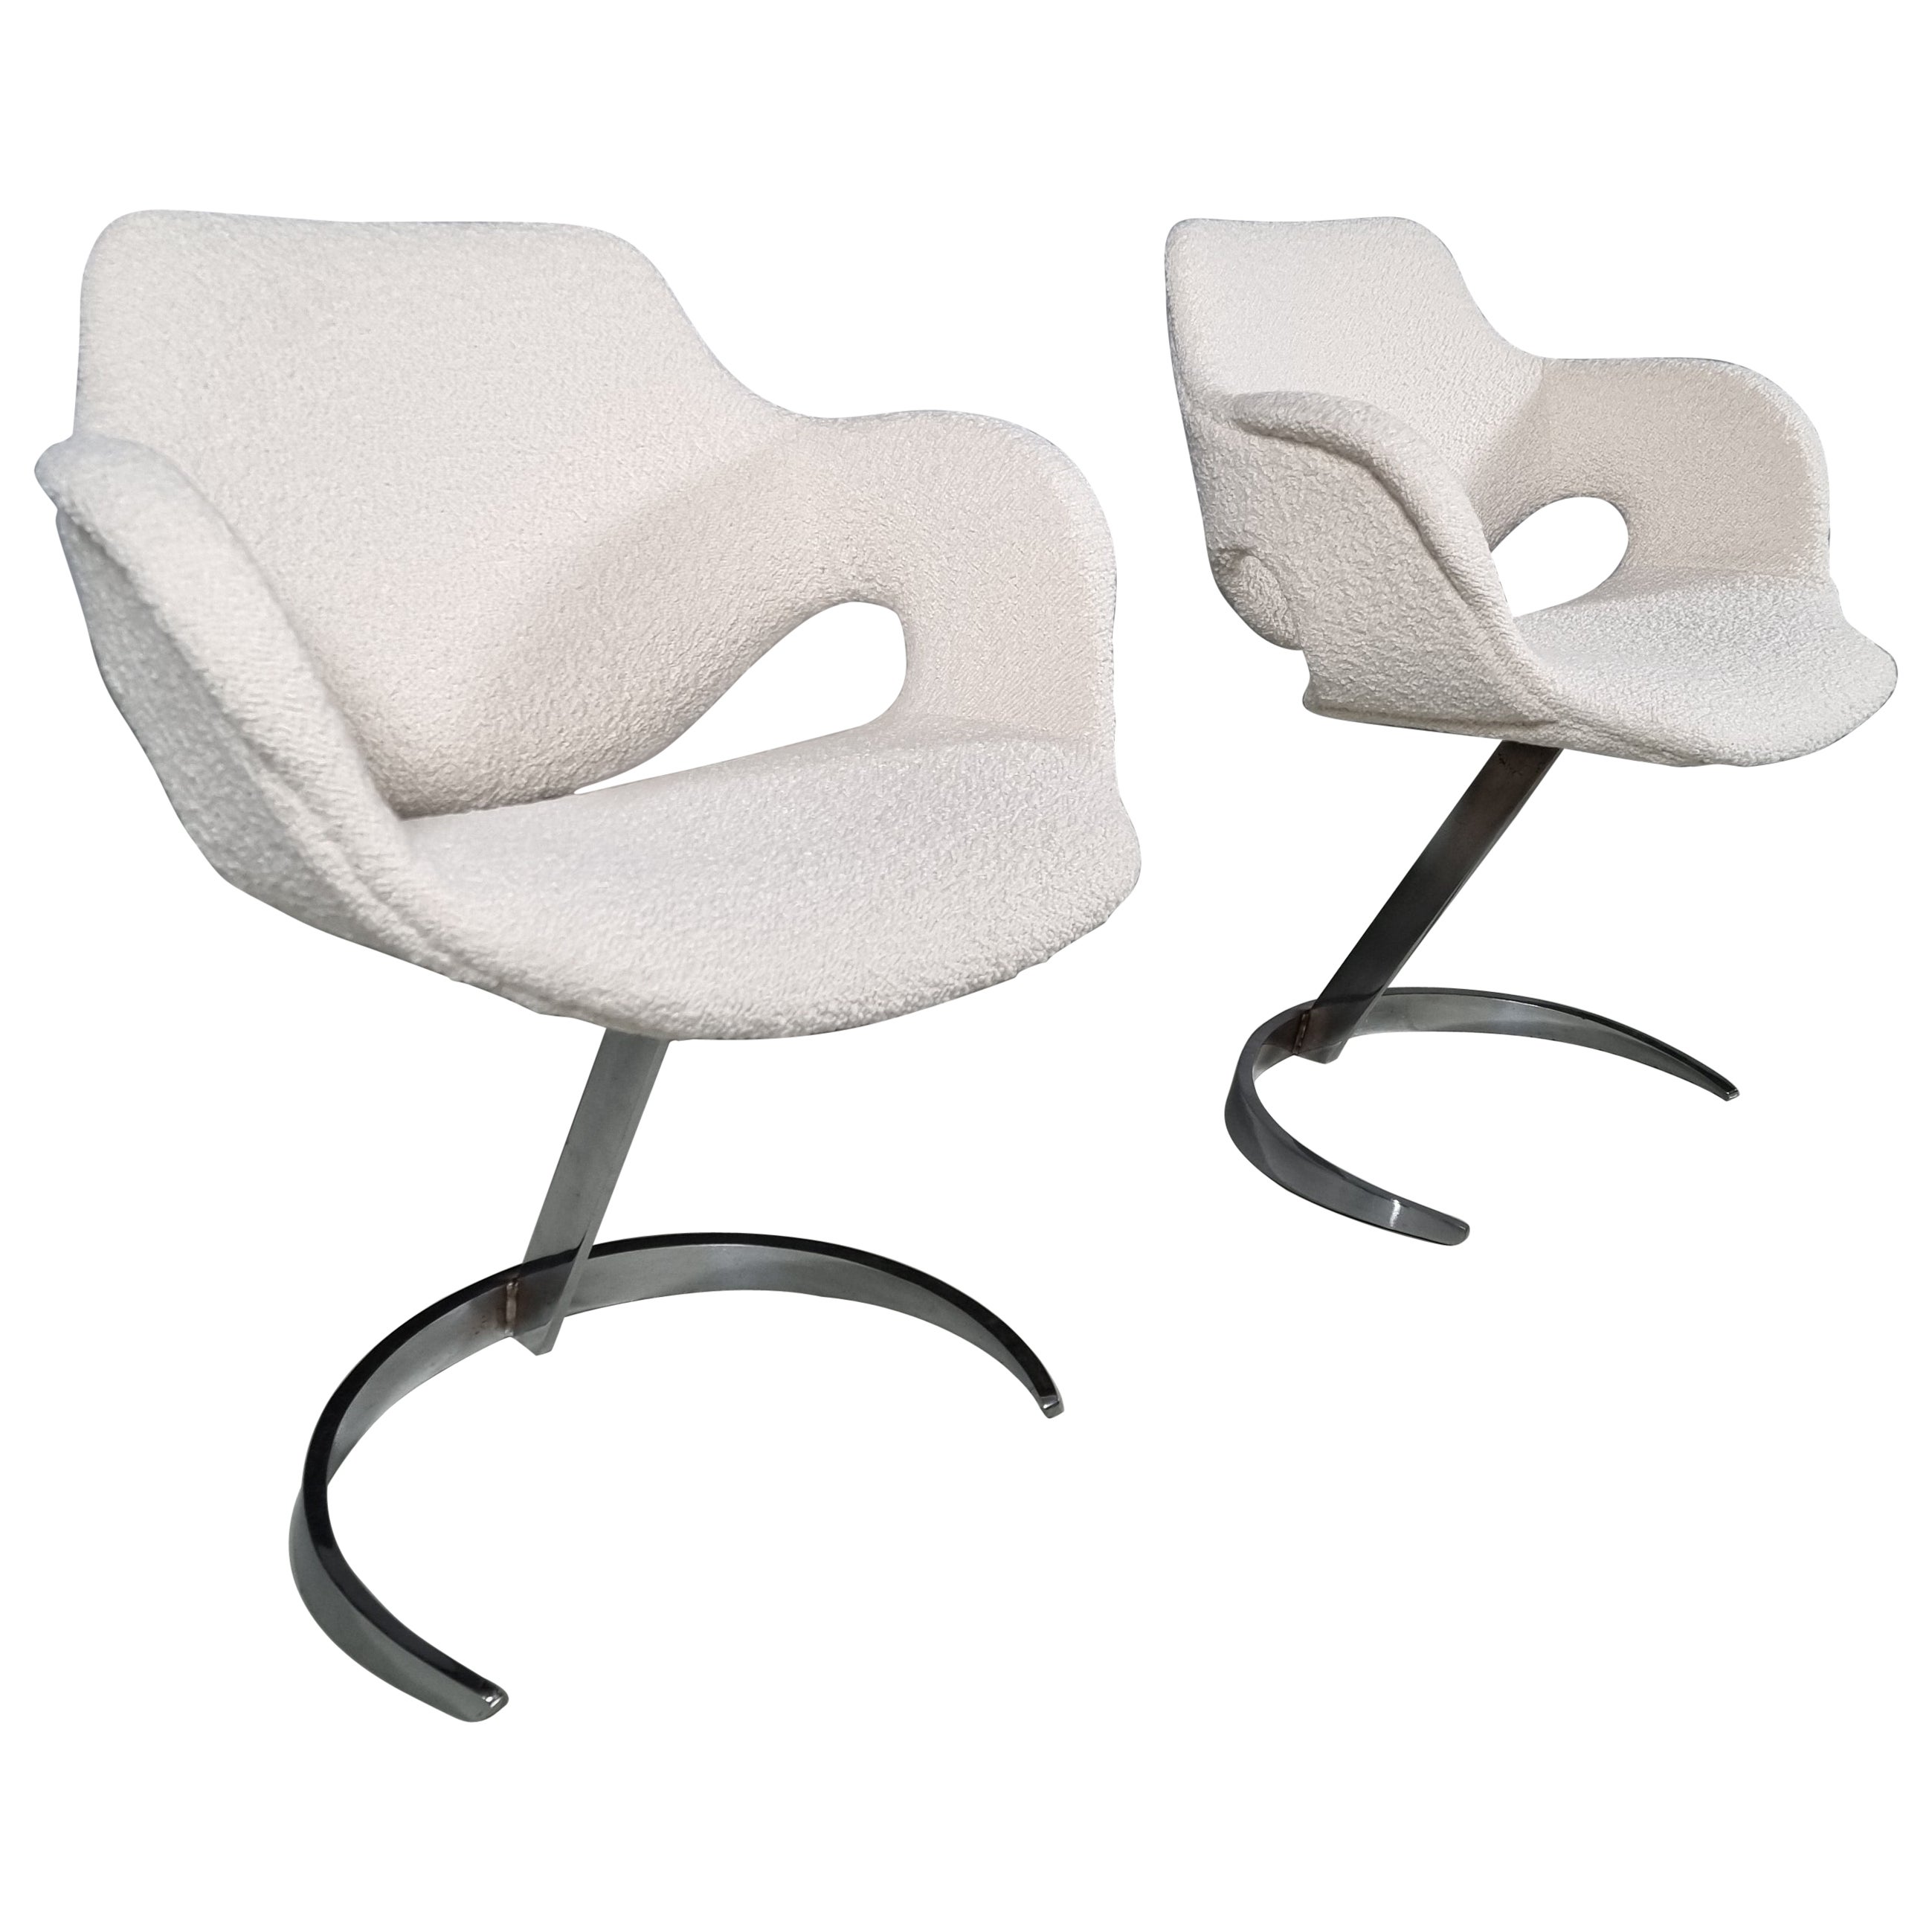 Boris Tabacoff Scimitar Chairs in bouclé, Mobilier Modulaire Moderne 'MMM' For Sale